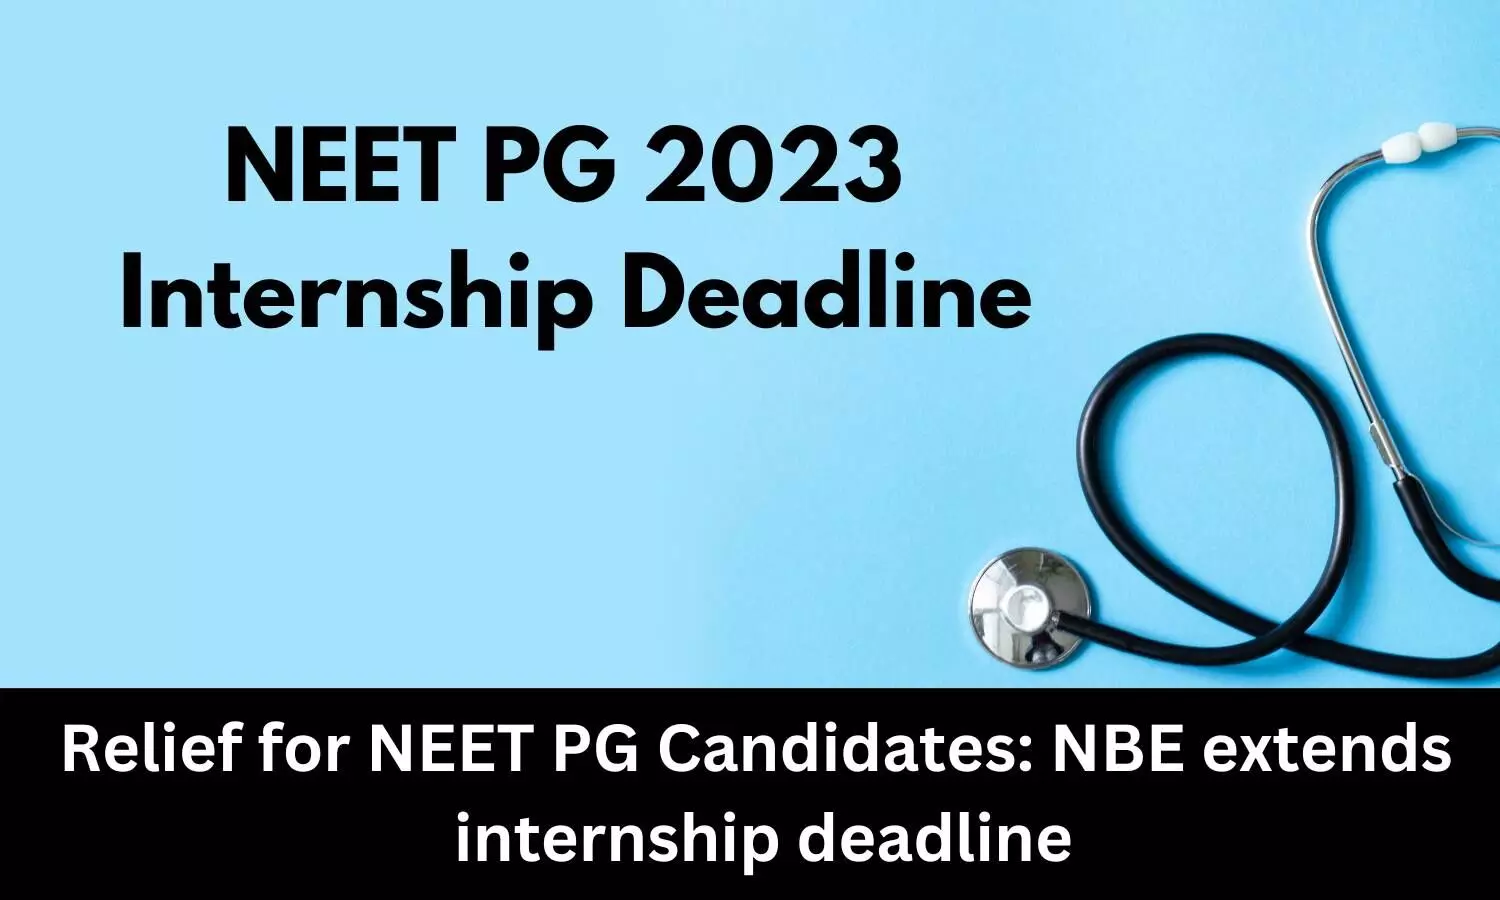 Relief for NEET PG Candidates: NBE extends internship deadline to June 30, 2023